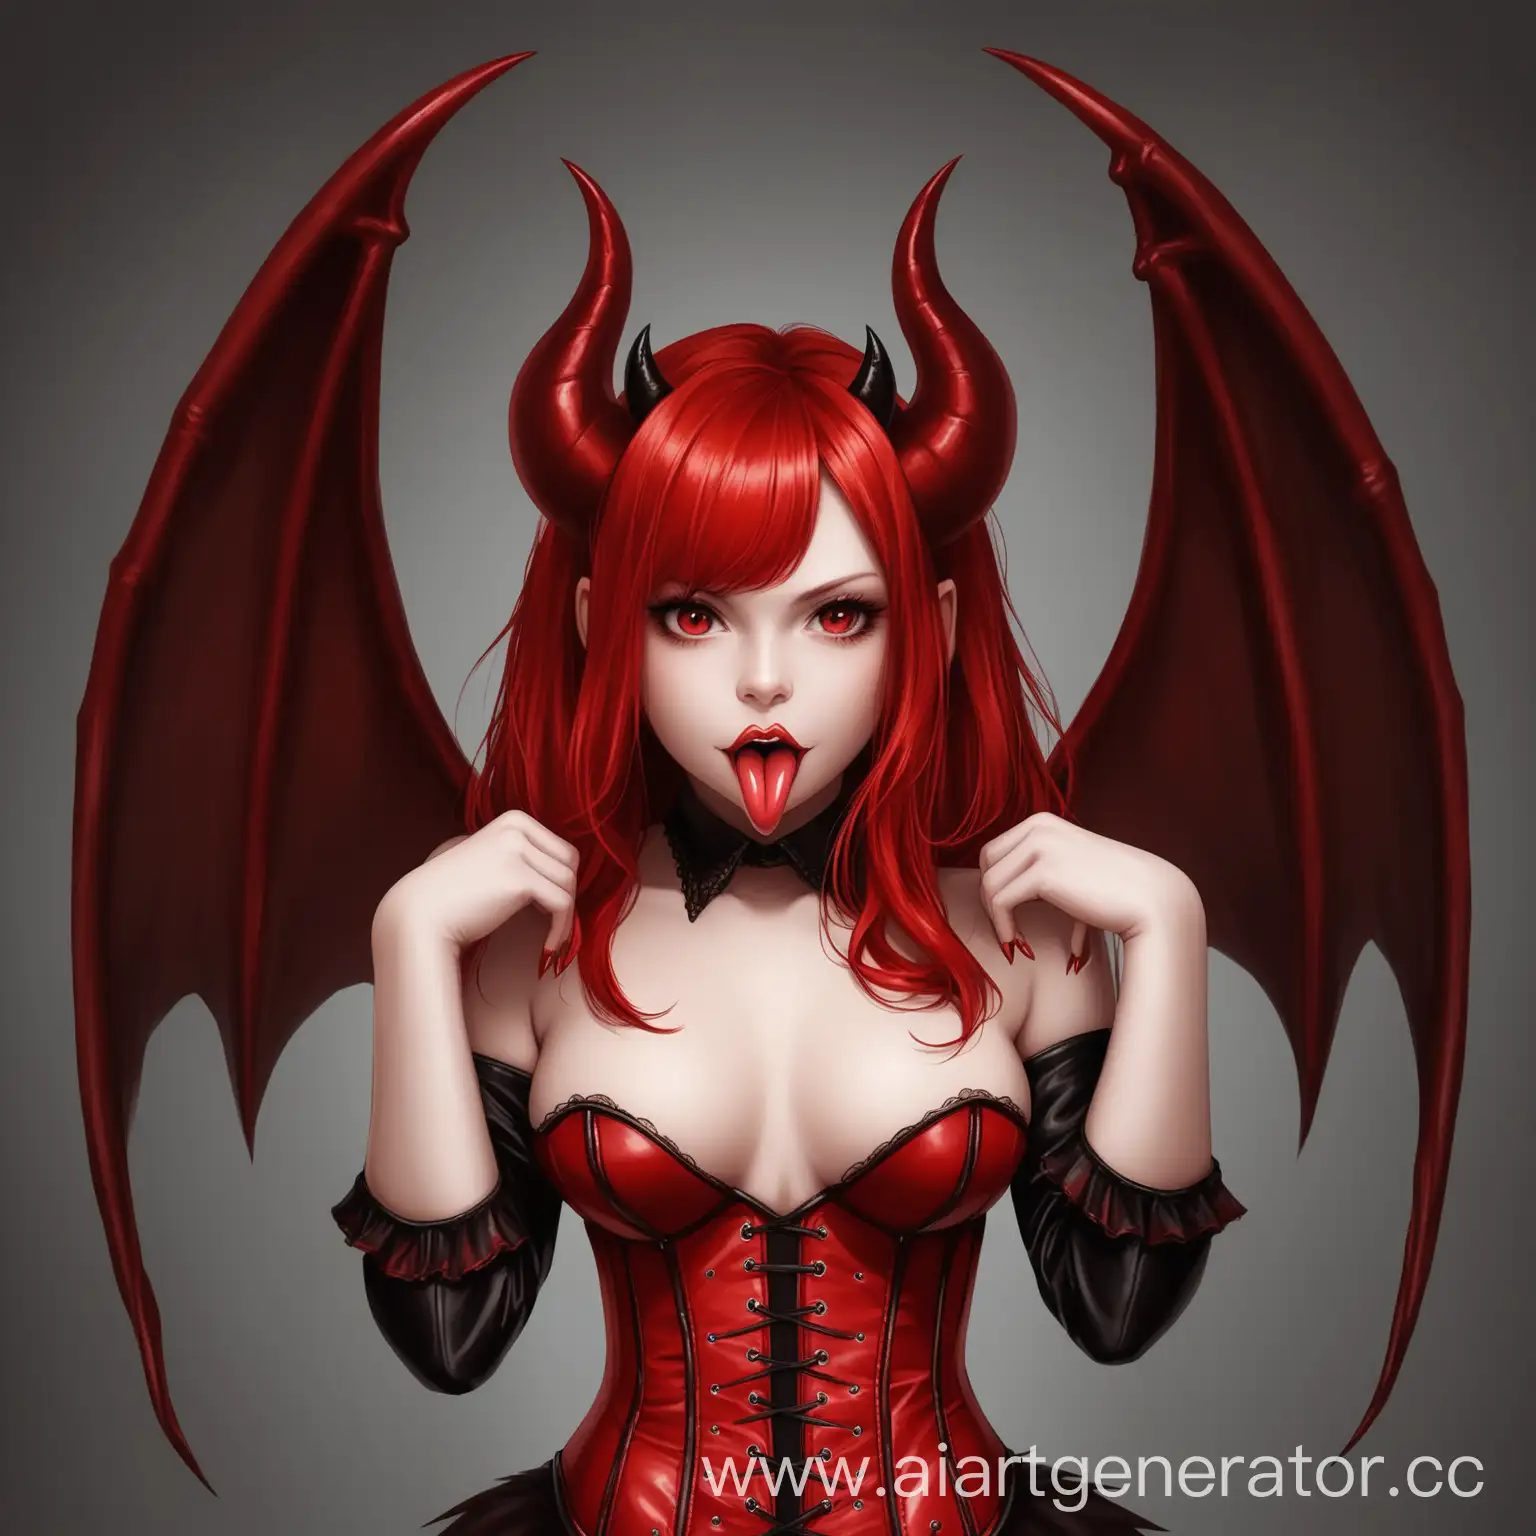 RedHaired-Devil-Girl-with-Wings-and-Tongue-Out-in-Leather-Corset